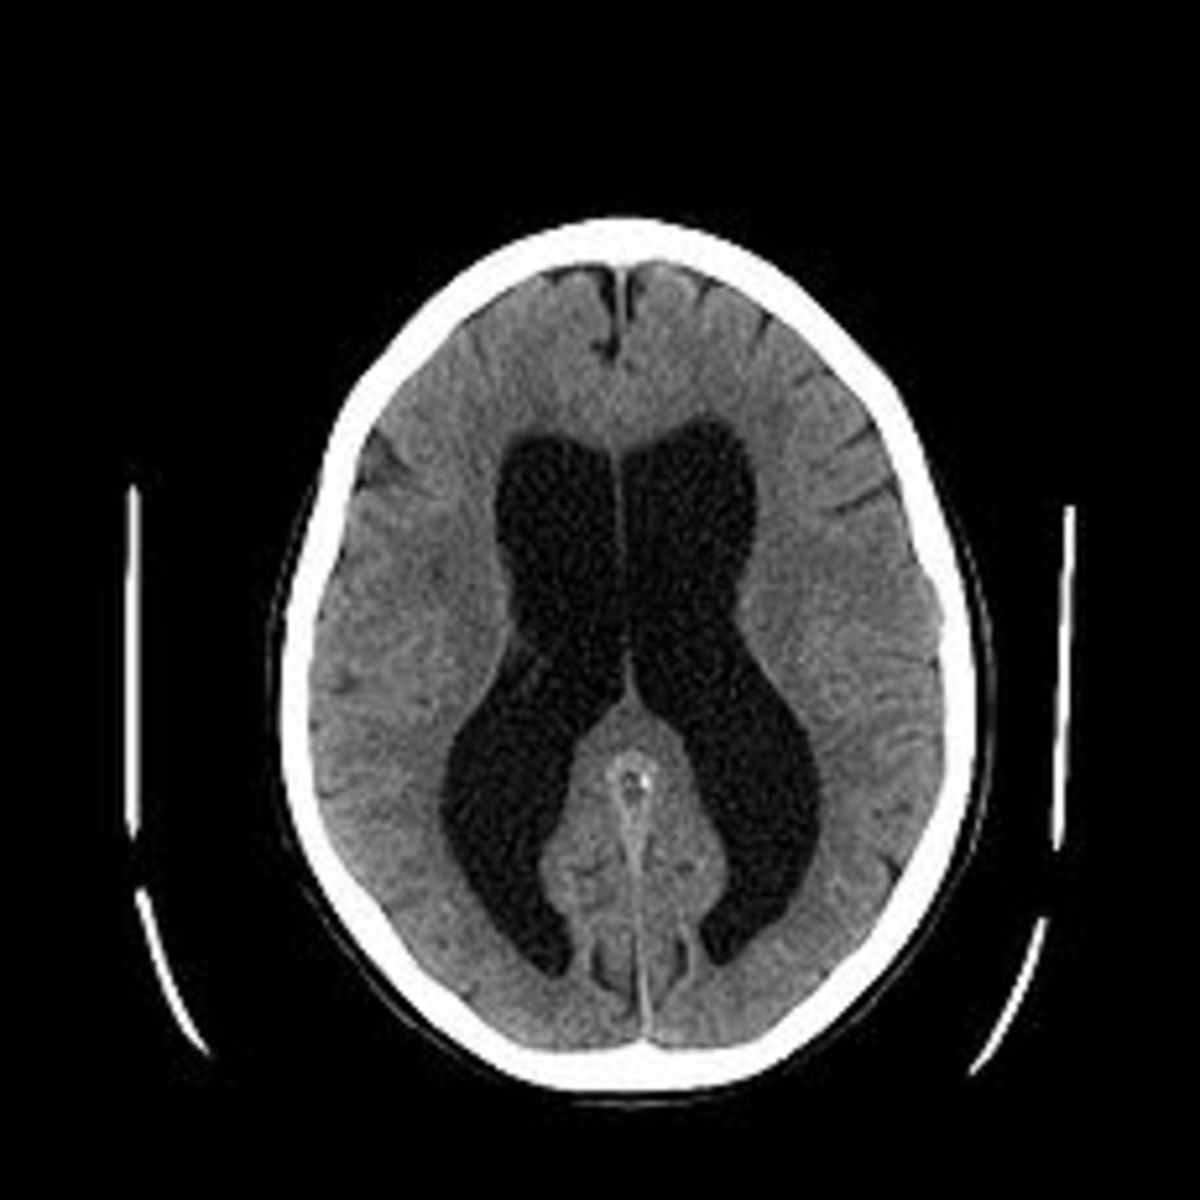 Hydrocephalus seen on a CT scan of the brain. The black areas in the middle of the brain are abnormally large and filled with fluid